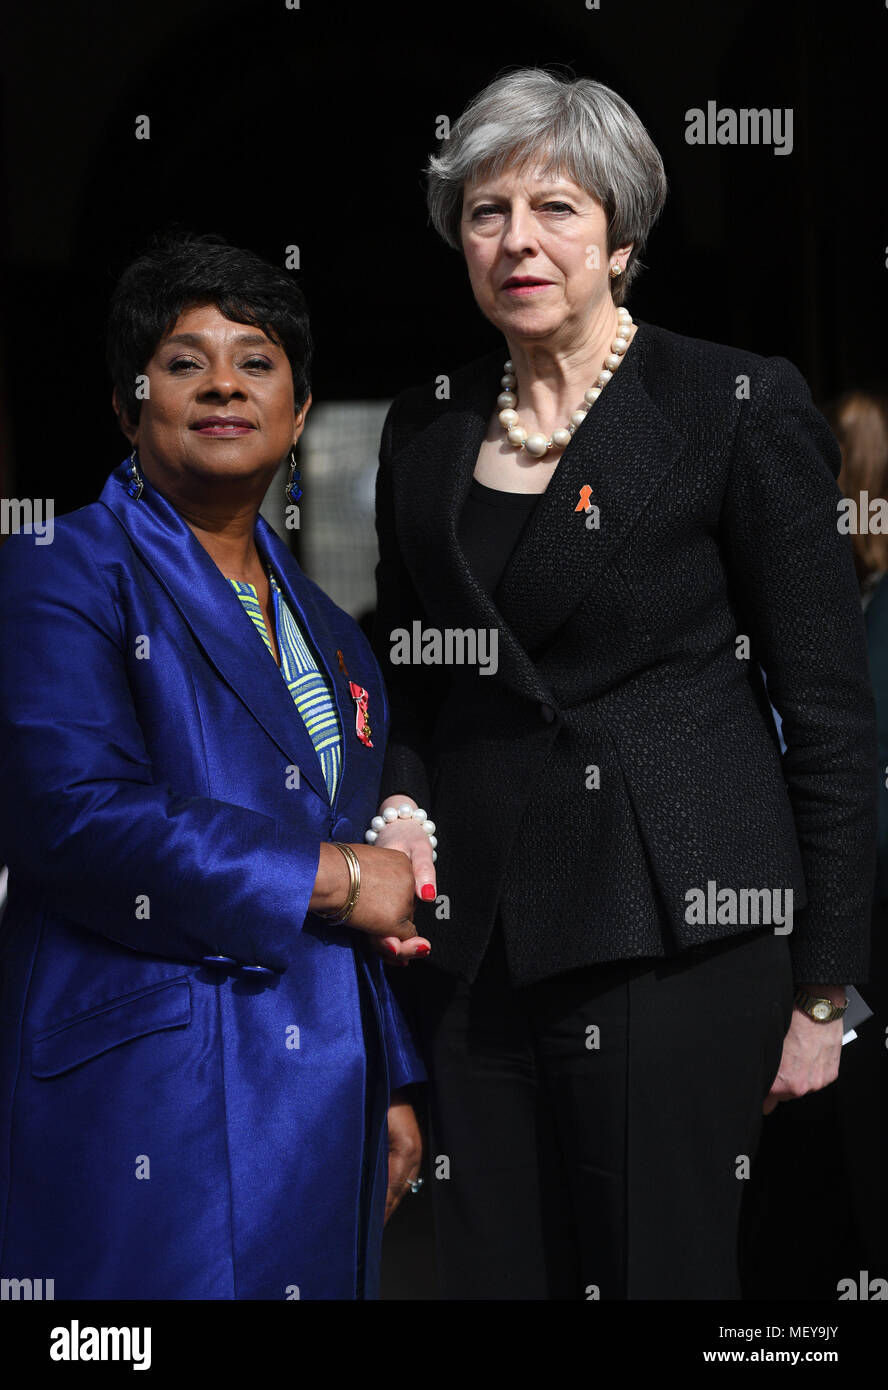 Baroness Lawrence and Prime Minister Theresa May after attending a memorial service at St Martin-in-the-Fields in Trafalgar Square, London to commemorate the 25th anniversary of the murder of Stephen Lawrence. Stock Photo